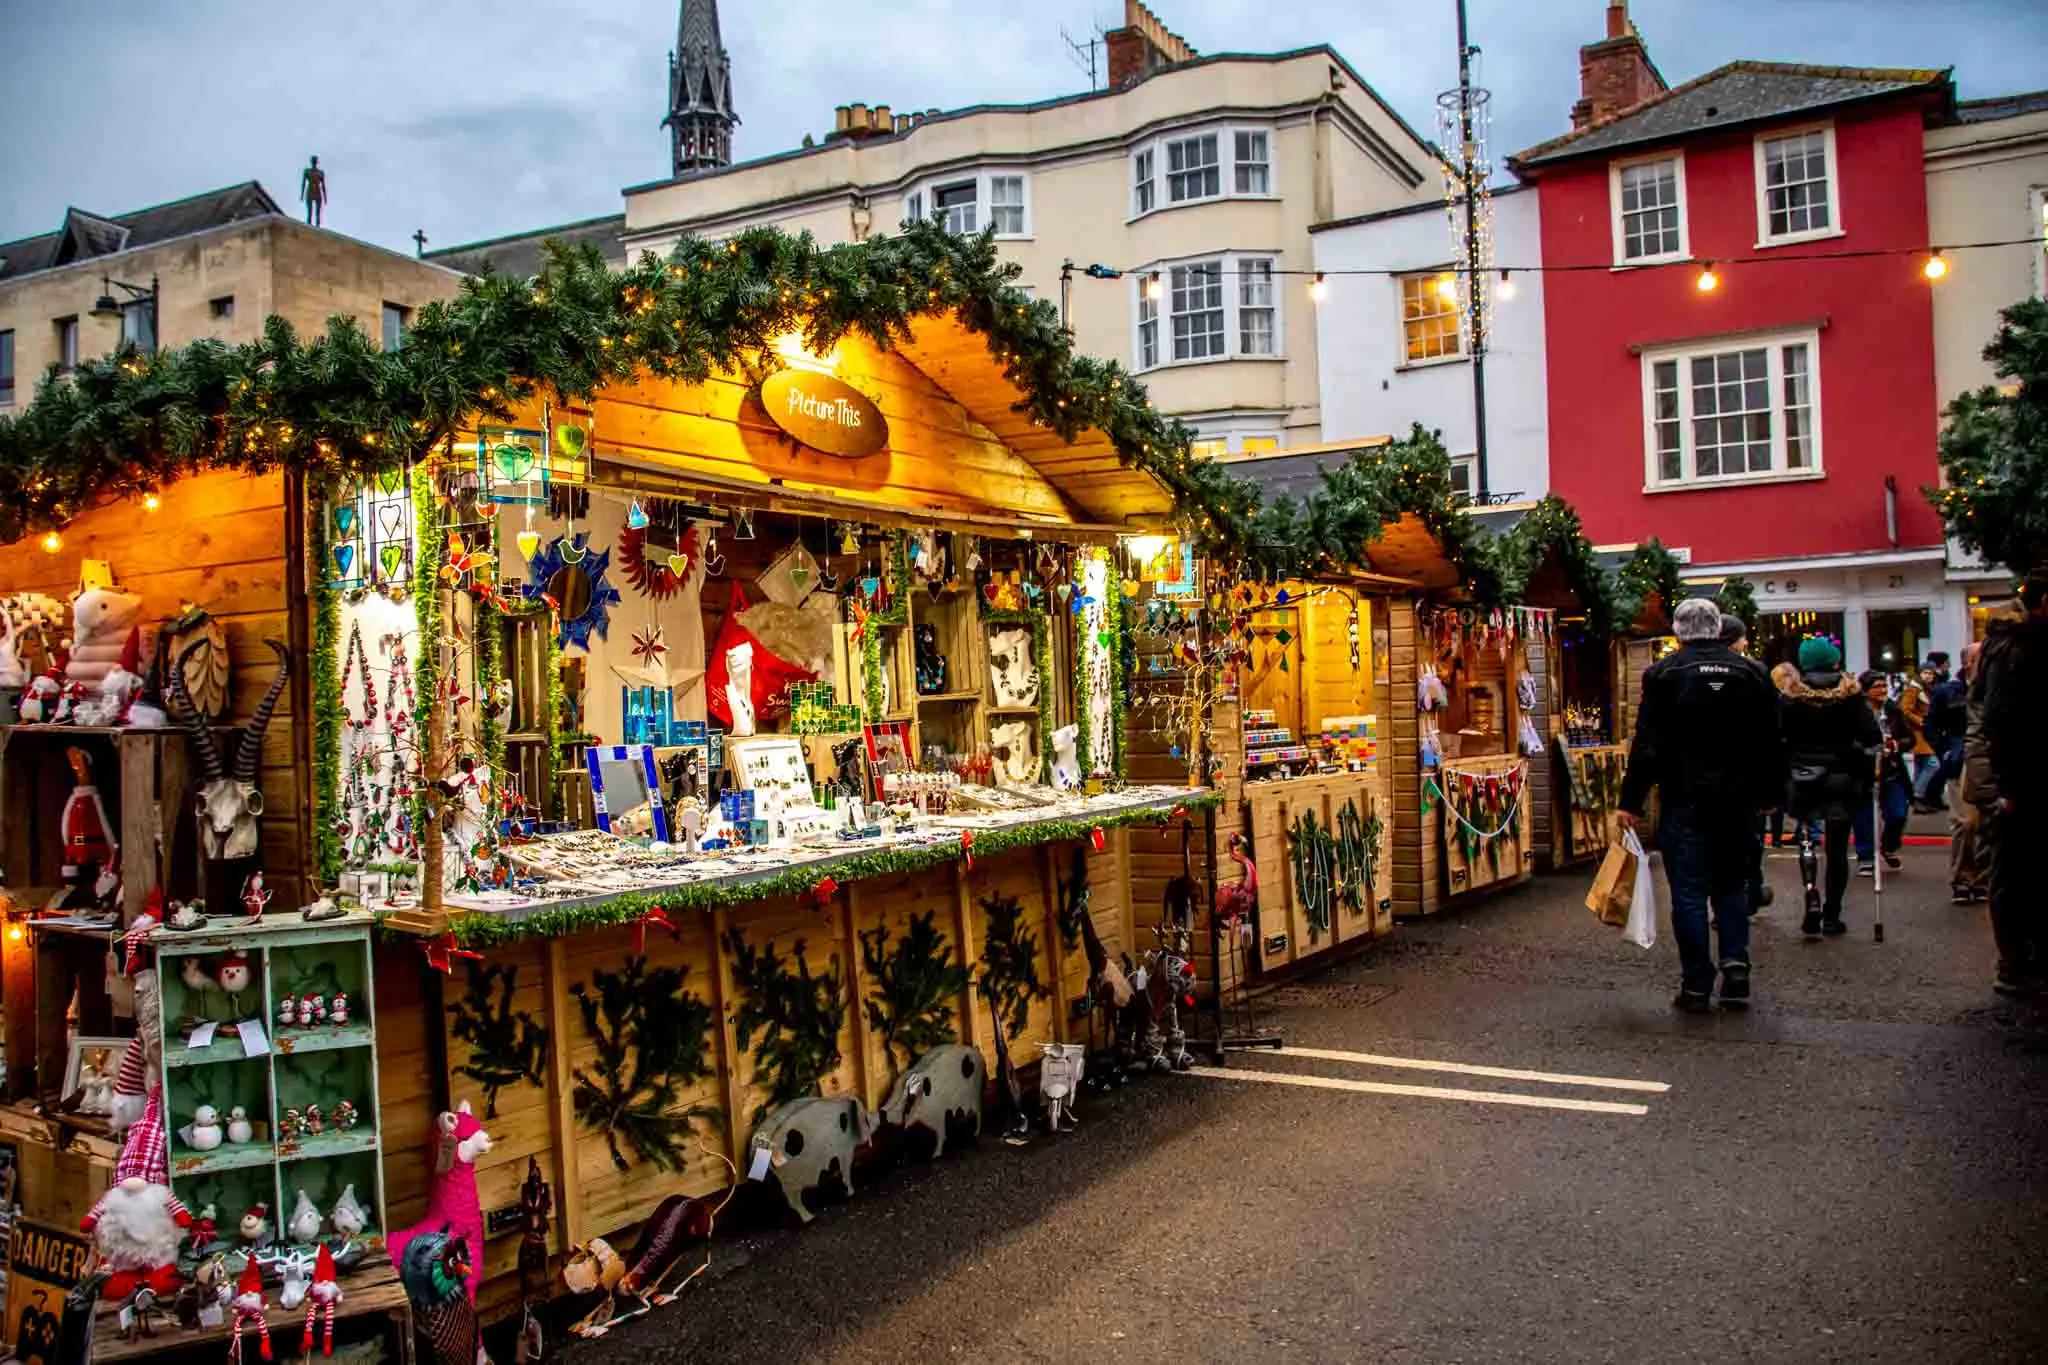 Wooden chalets seeling merchandise at the Oxford Christmas Market in England